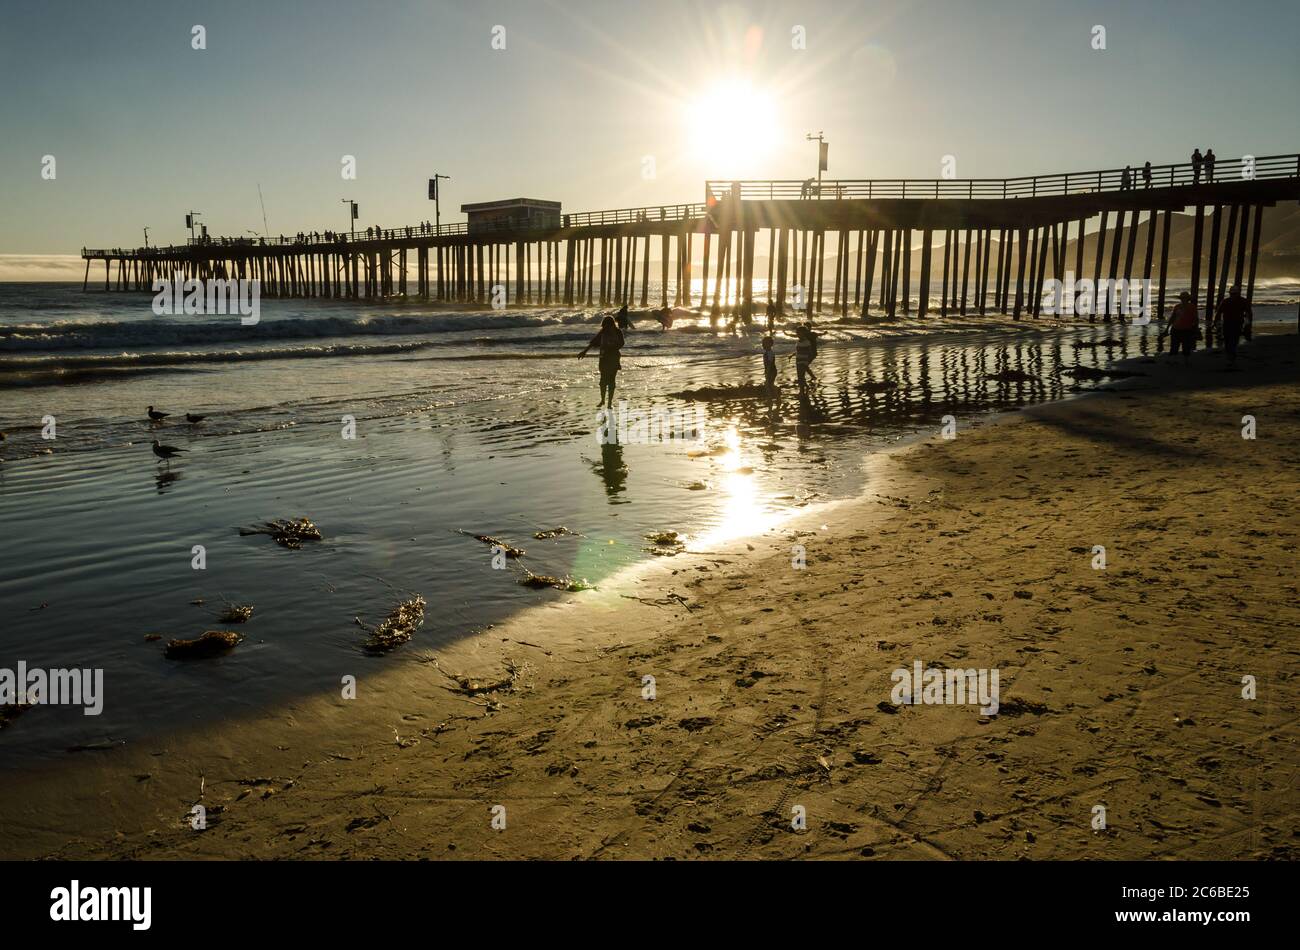 Pier at the beach in California during sunset Stock Photo